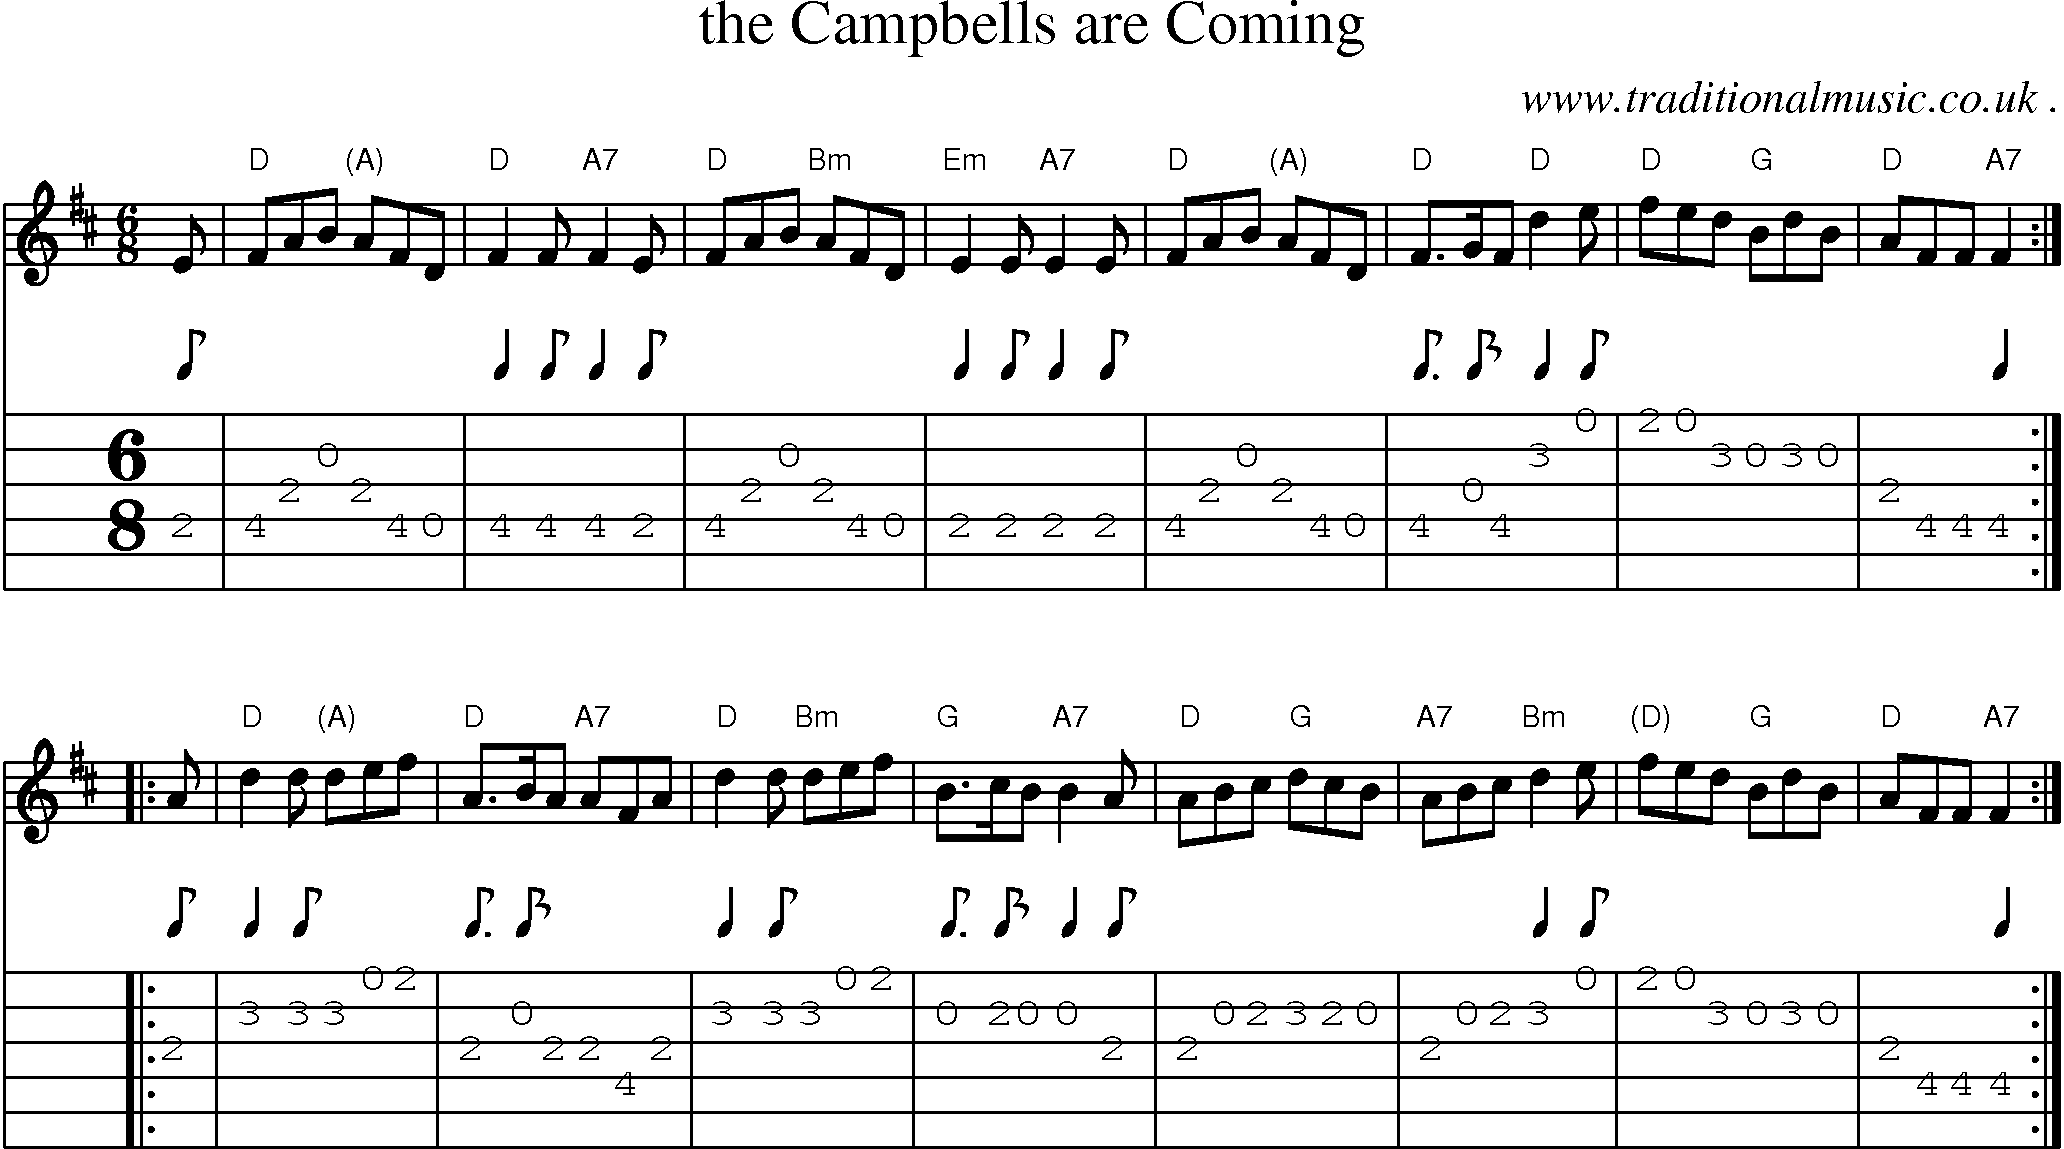 Sheet-music  score, Chords and Guitar Tabs for The Campbells Are Coming